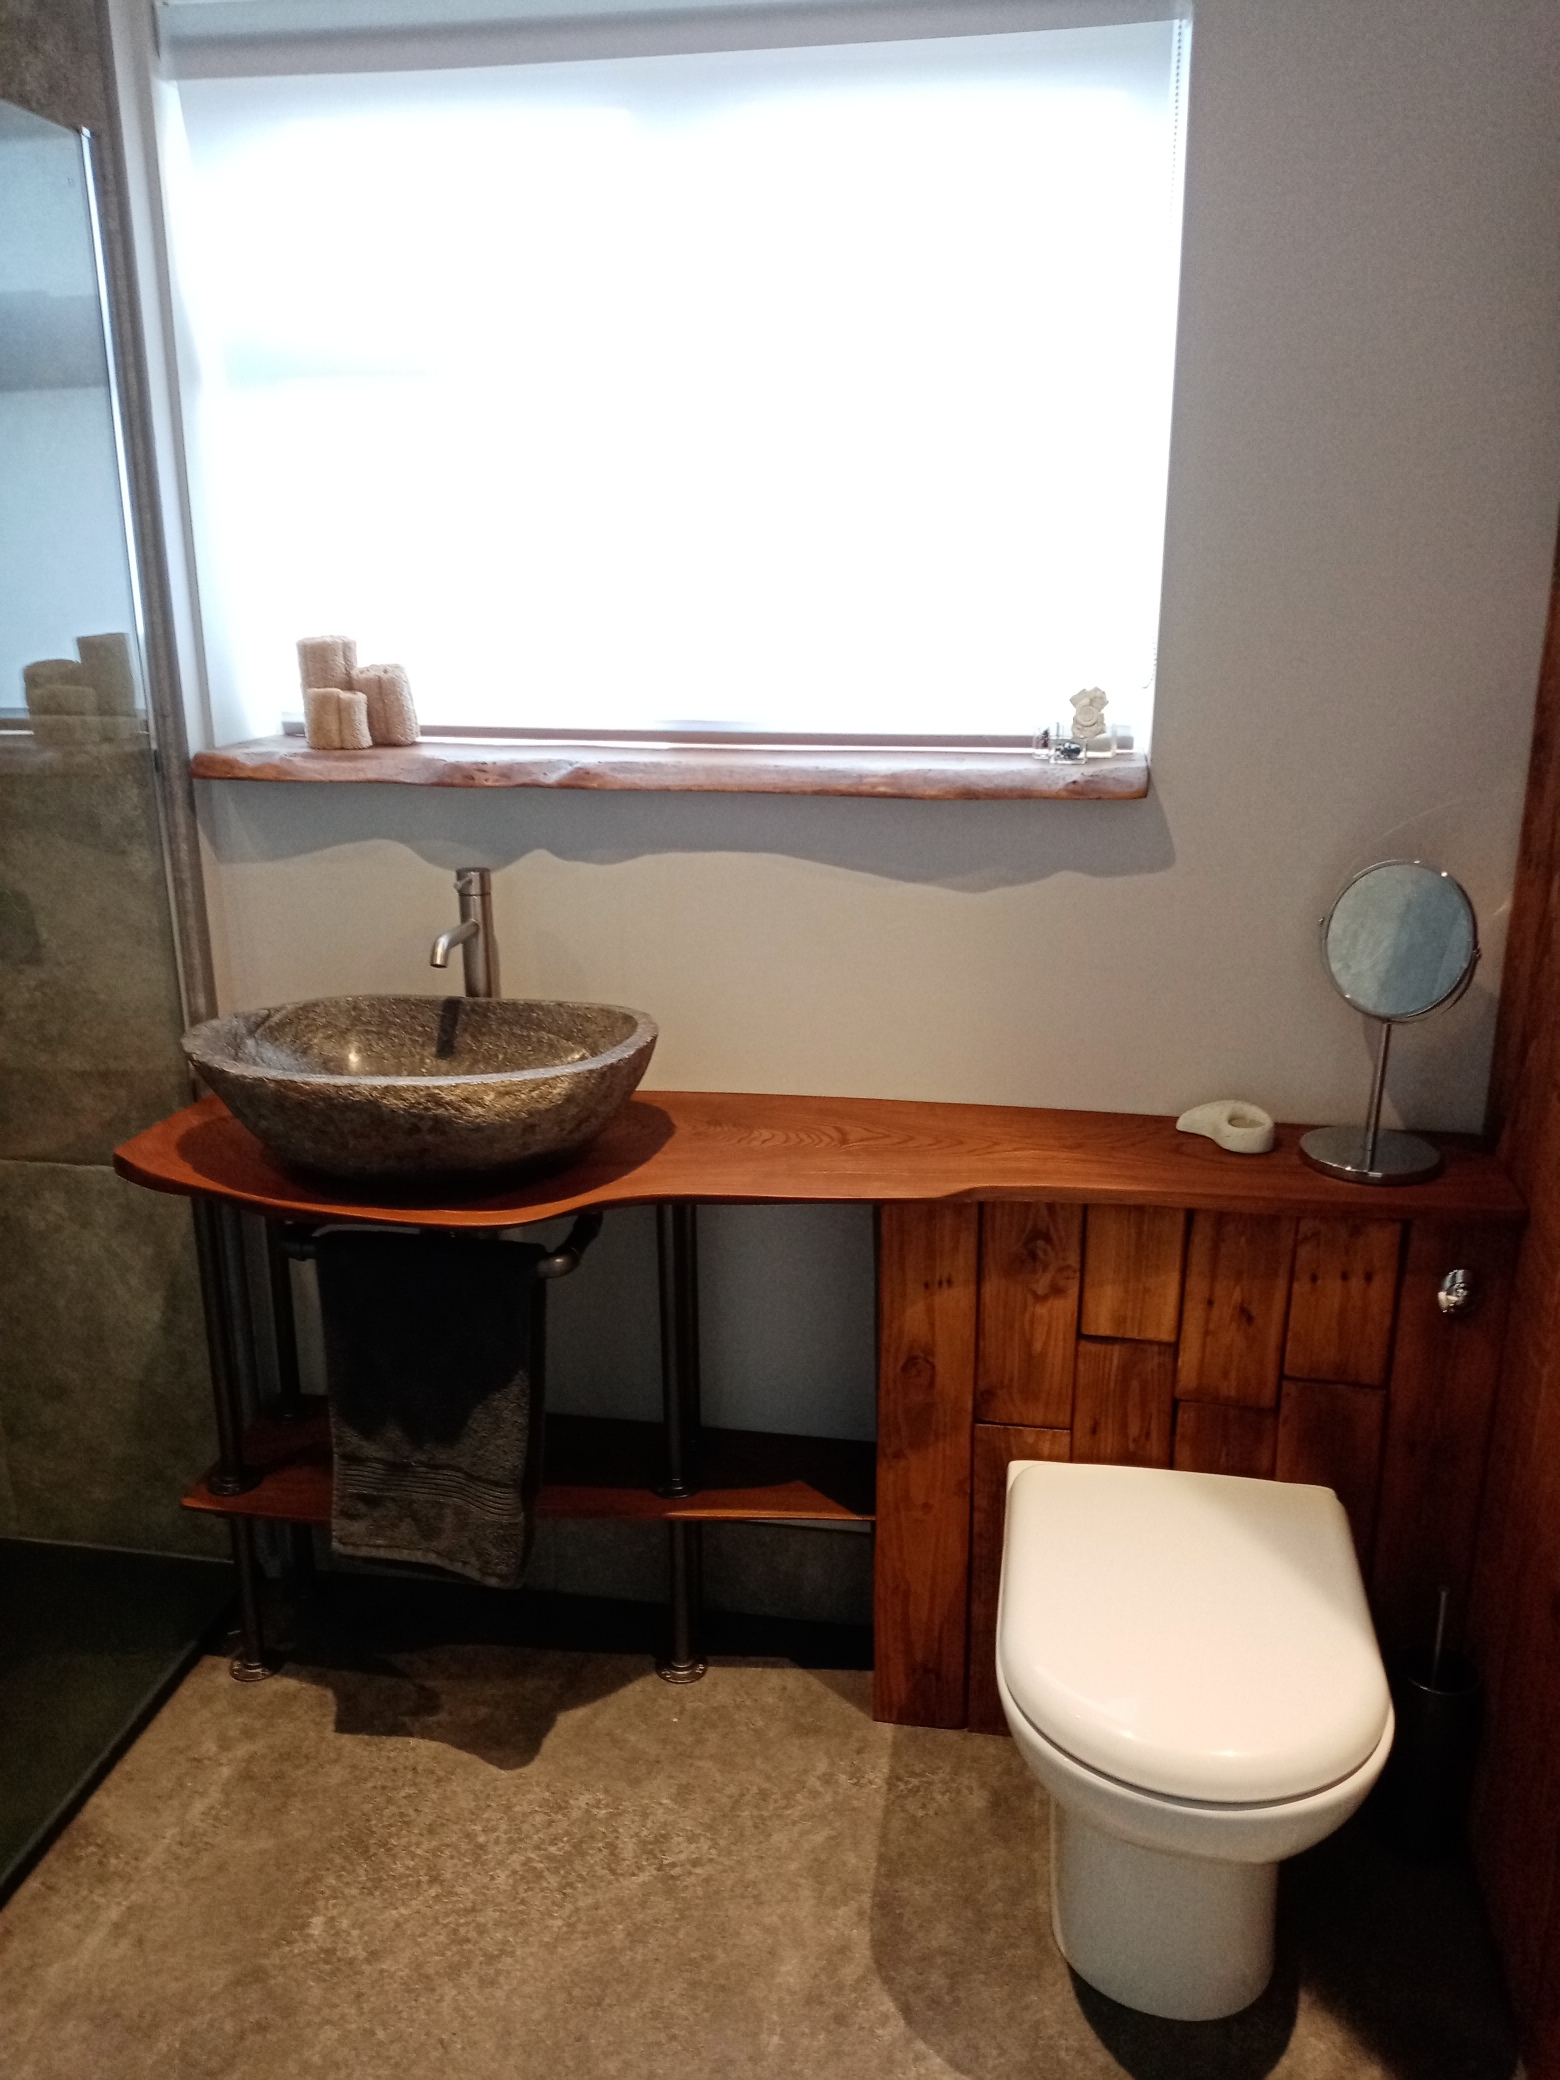 Earthy and natural bathroom designed by Paint and Plan, with elm wood slab countertop and boulderstone sink